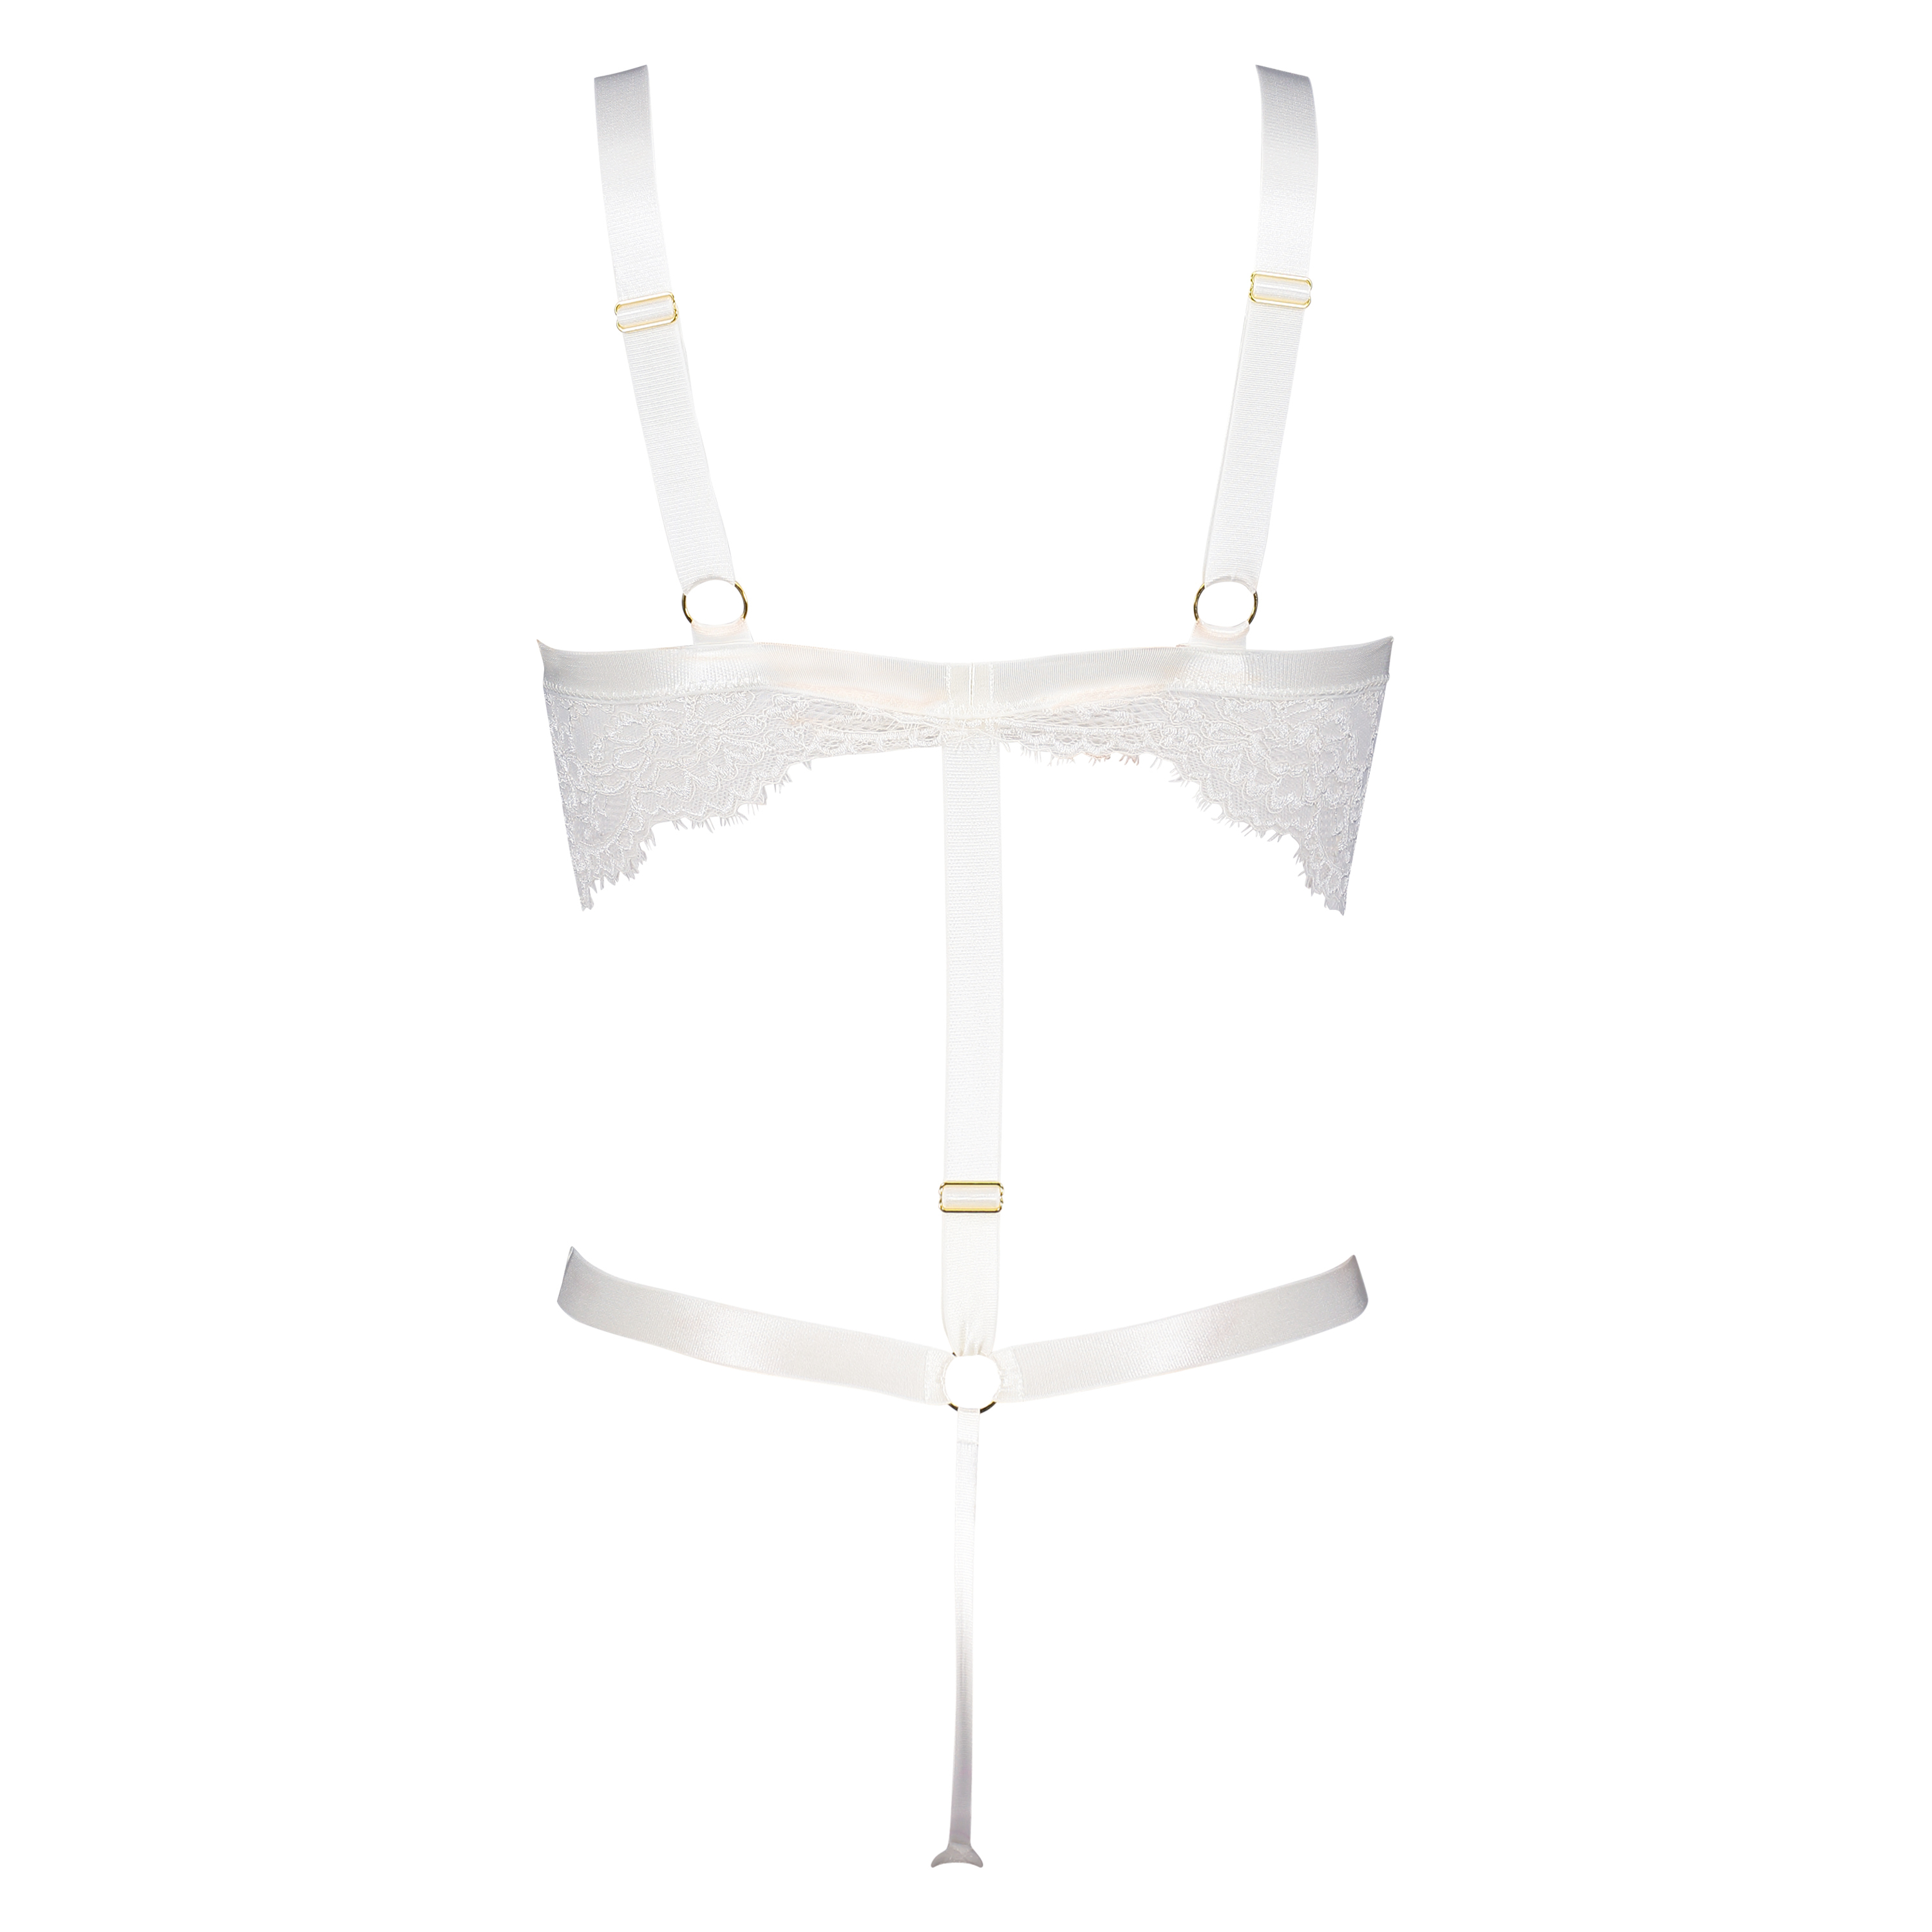 Private Ginger Open Crotch Body for £37 - Bodies & Bustiers - Hunkemöller